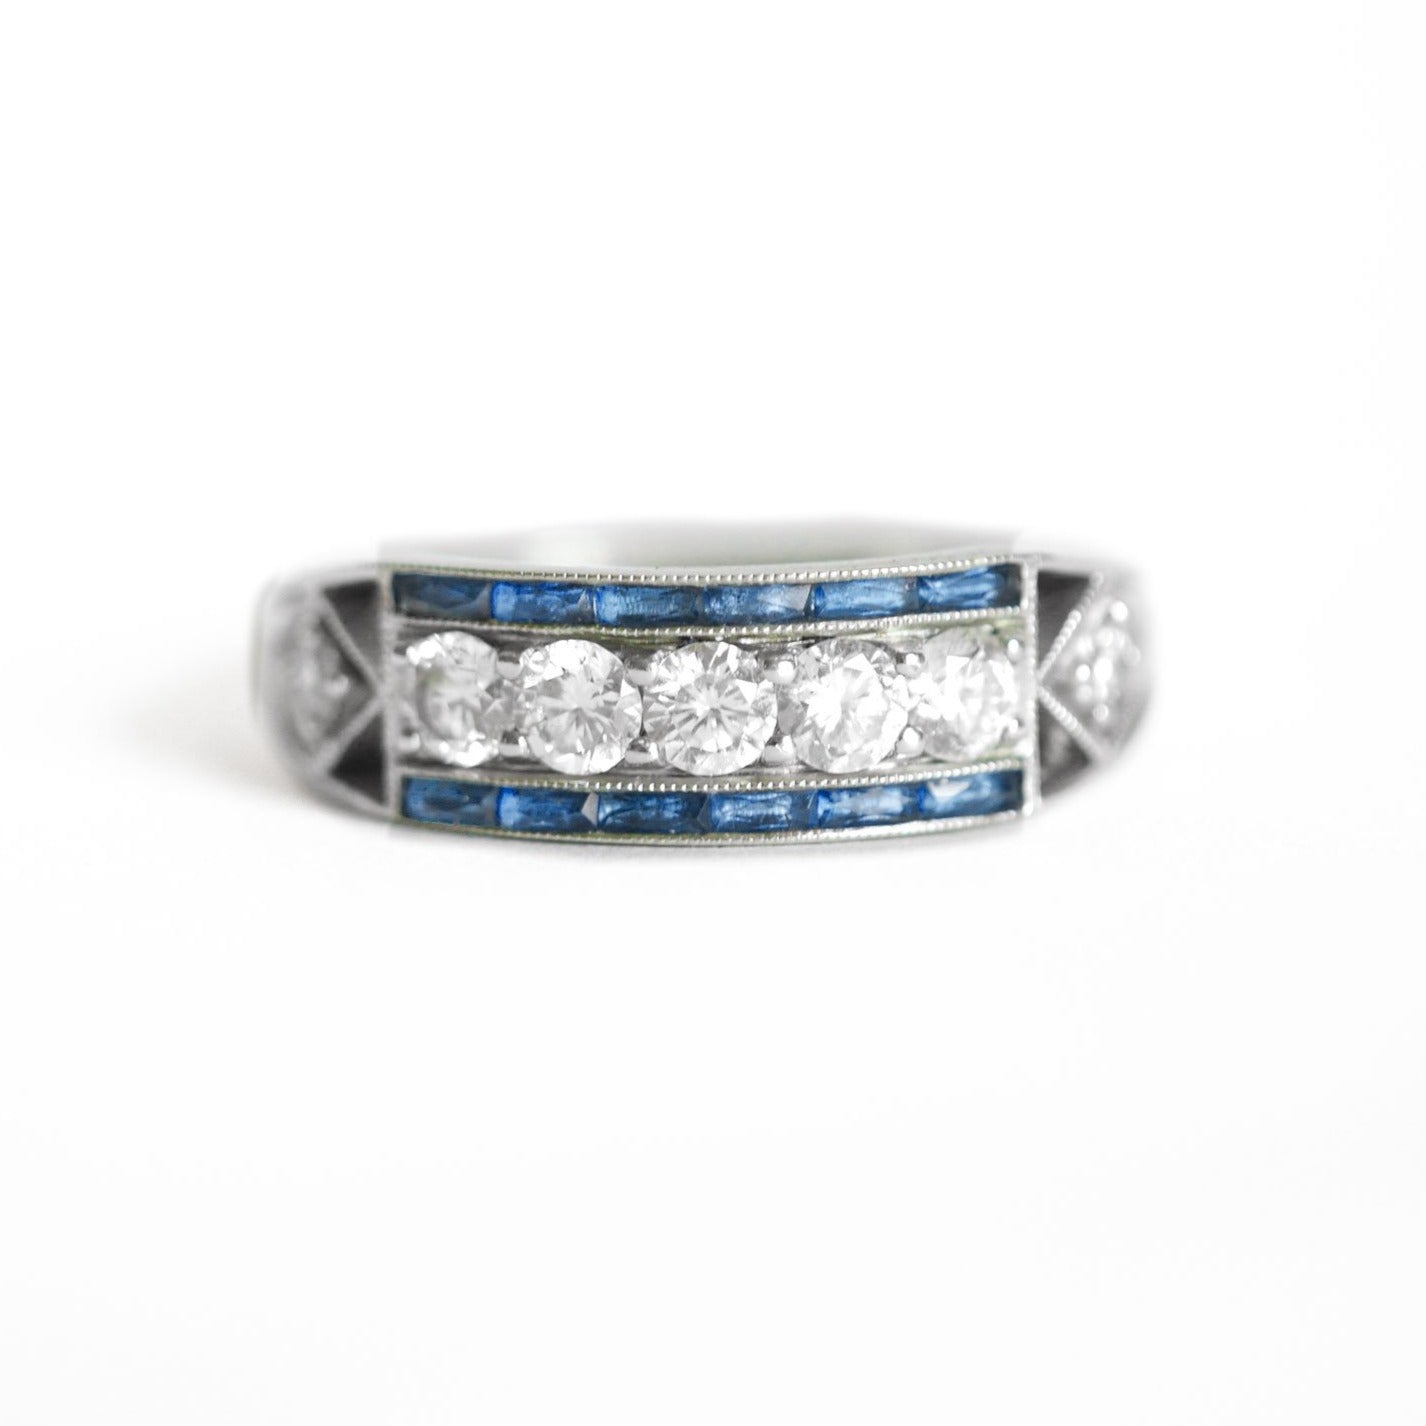 Art Deco Five Diamond Ring with French Cut Sapphires